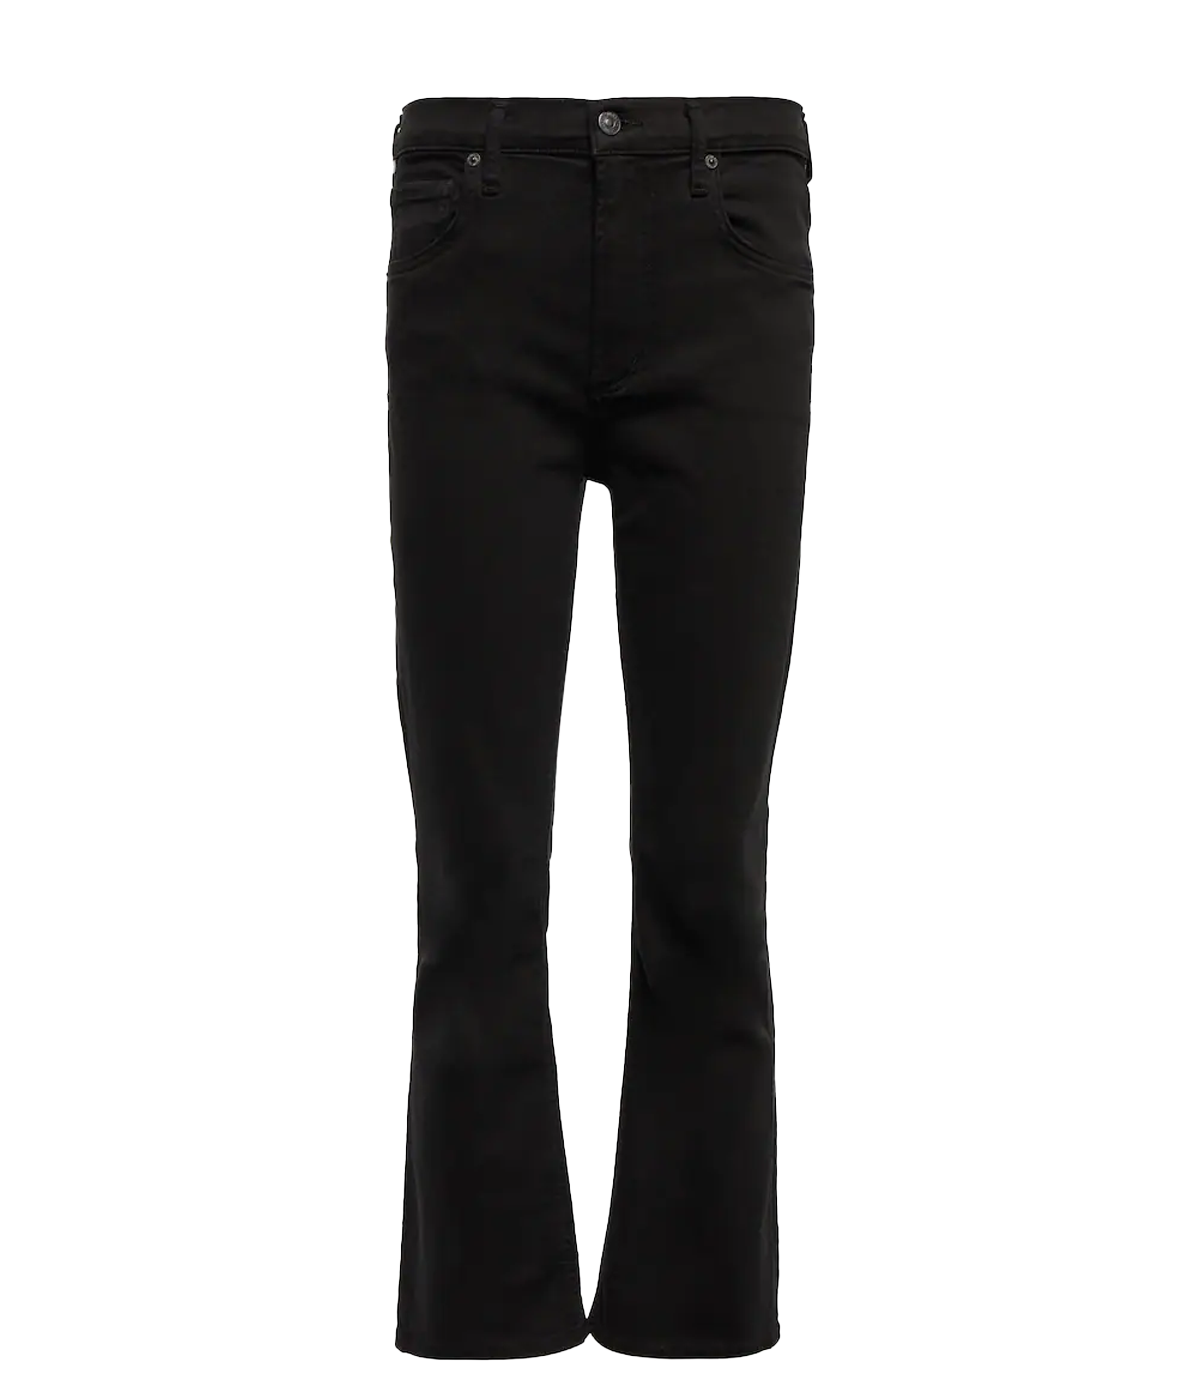 Isola Mid Rise Boot Jean in Plush Black